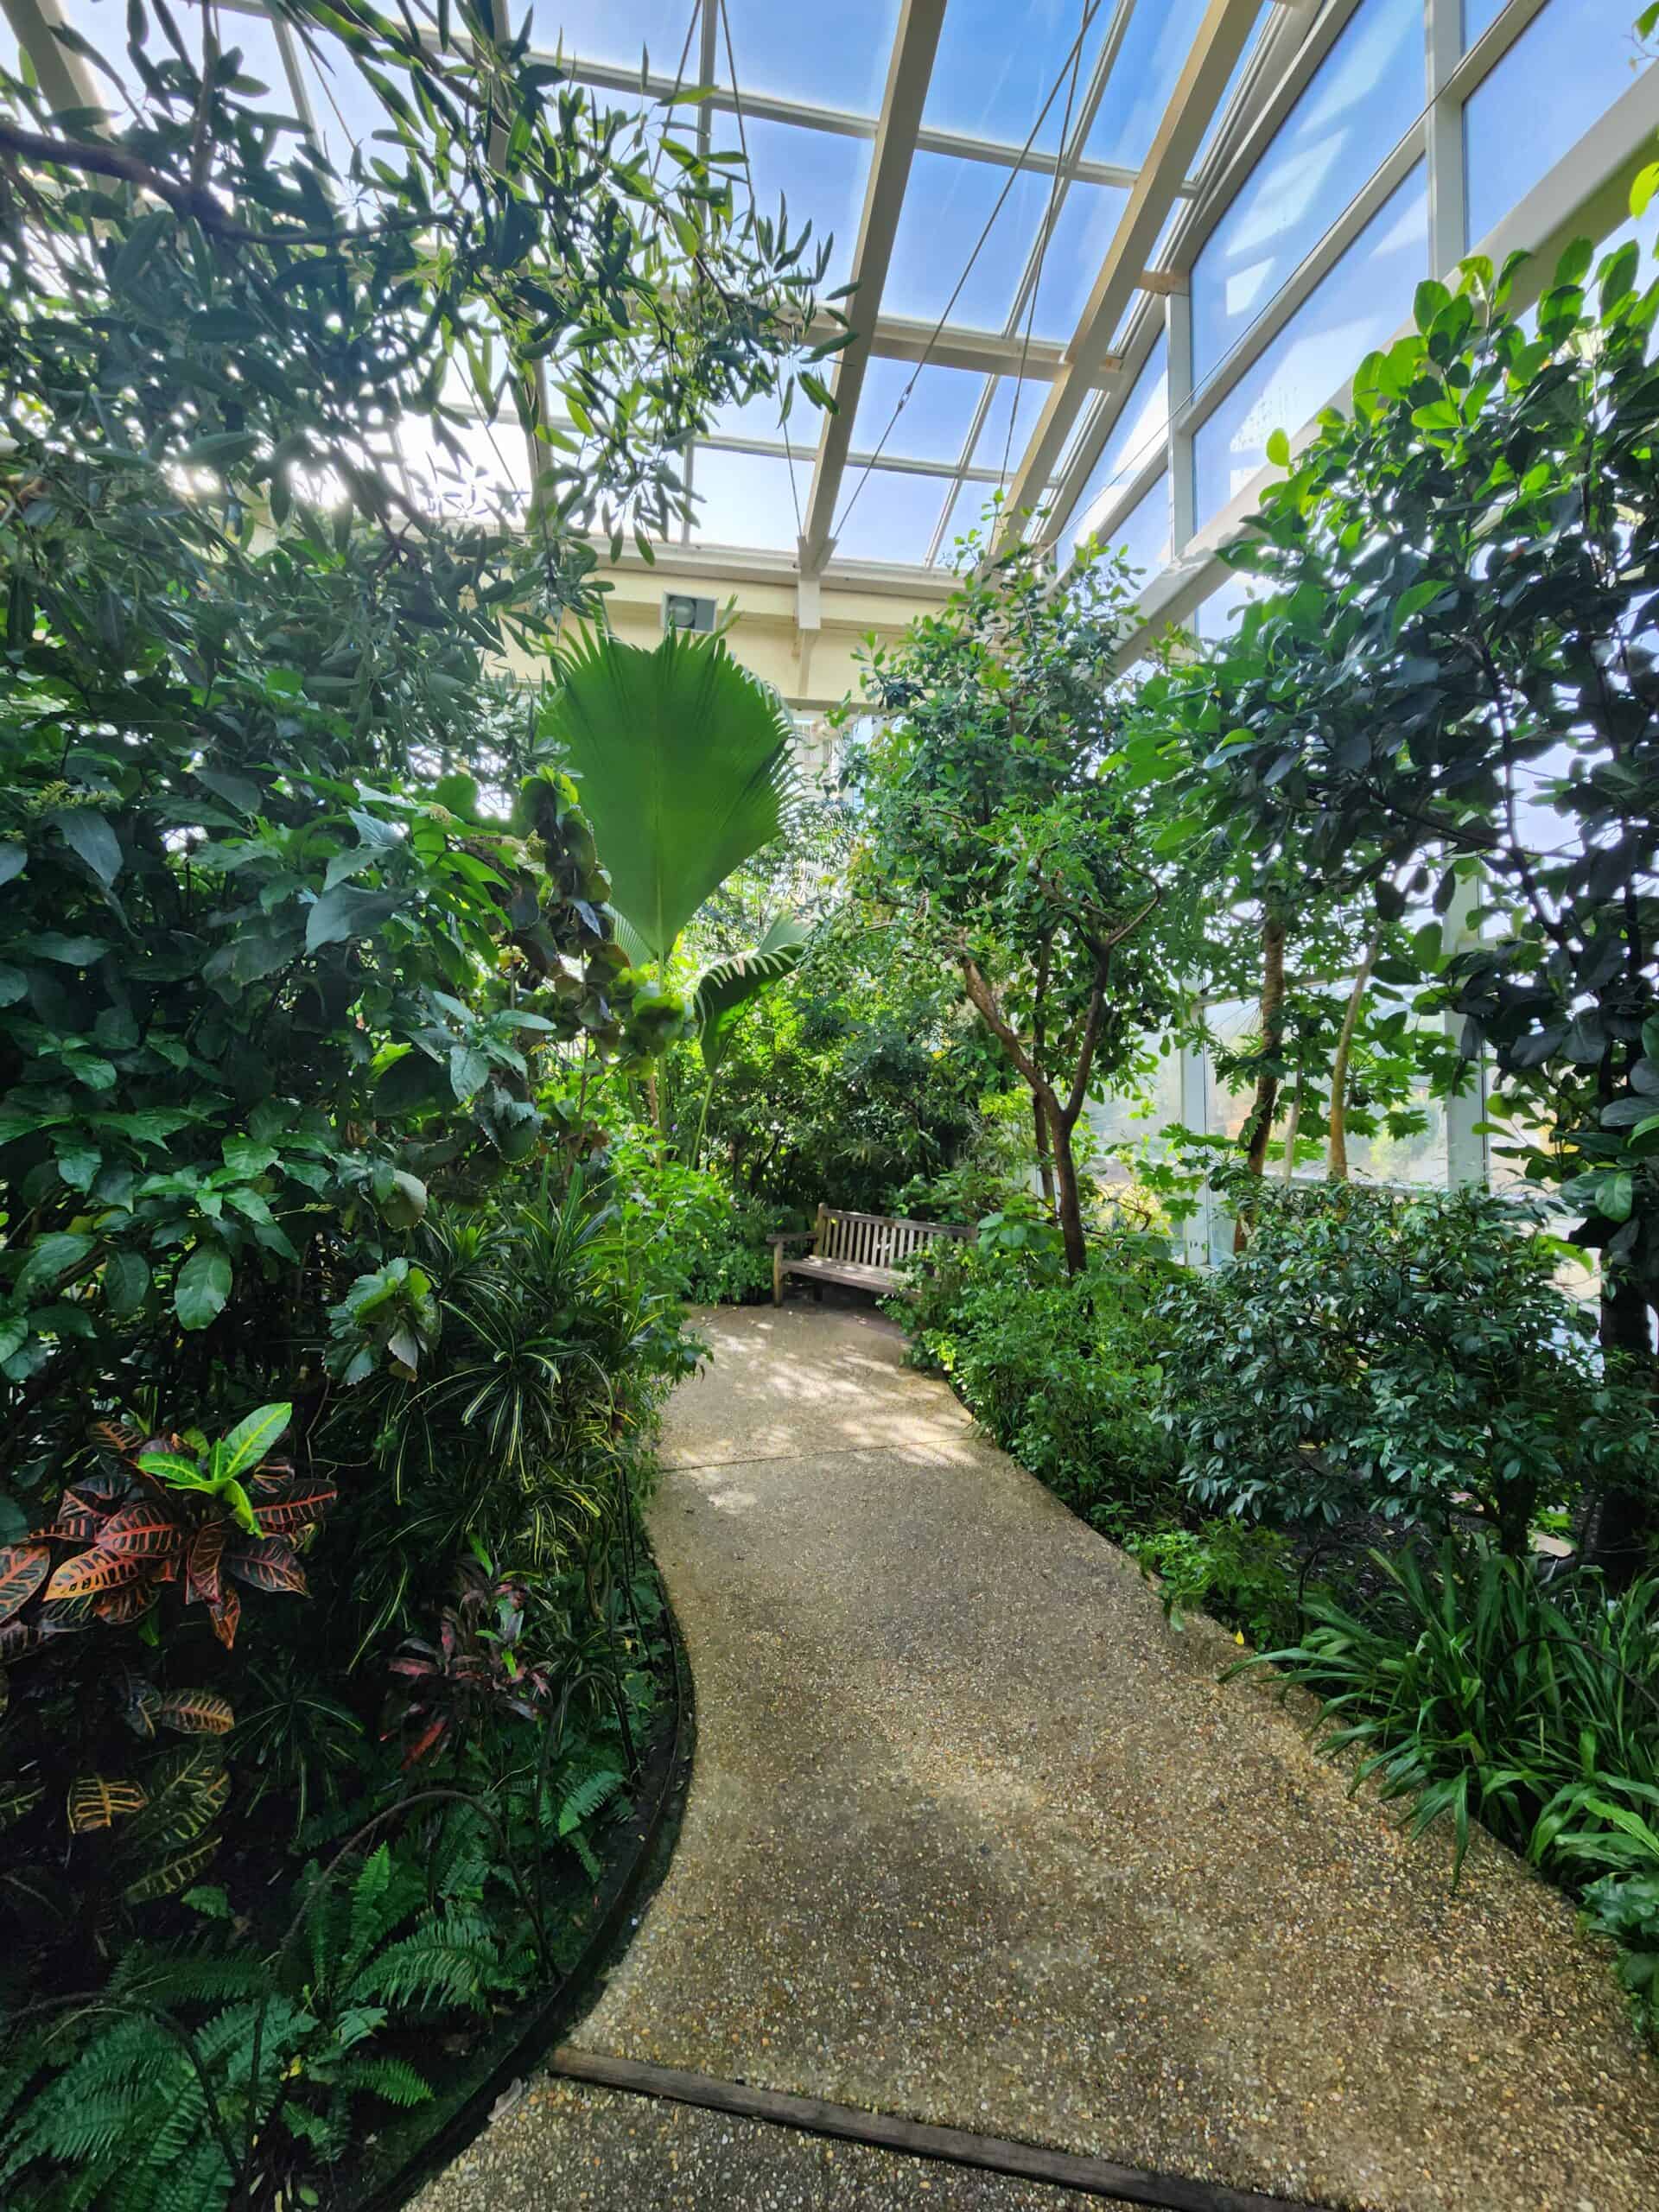 Tranquil walkway inside the Museum of Life and Science Butterfly House in Durham, NC, featuring a rich array of green plants and a sunlit glass atrium overhead, inviting visitors to a serene, natural escape.